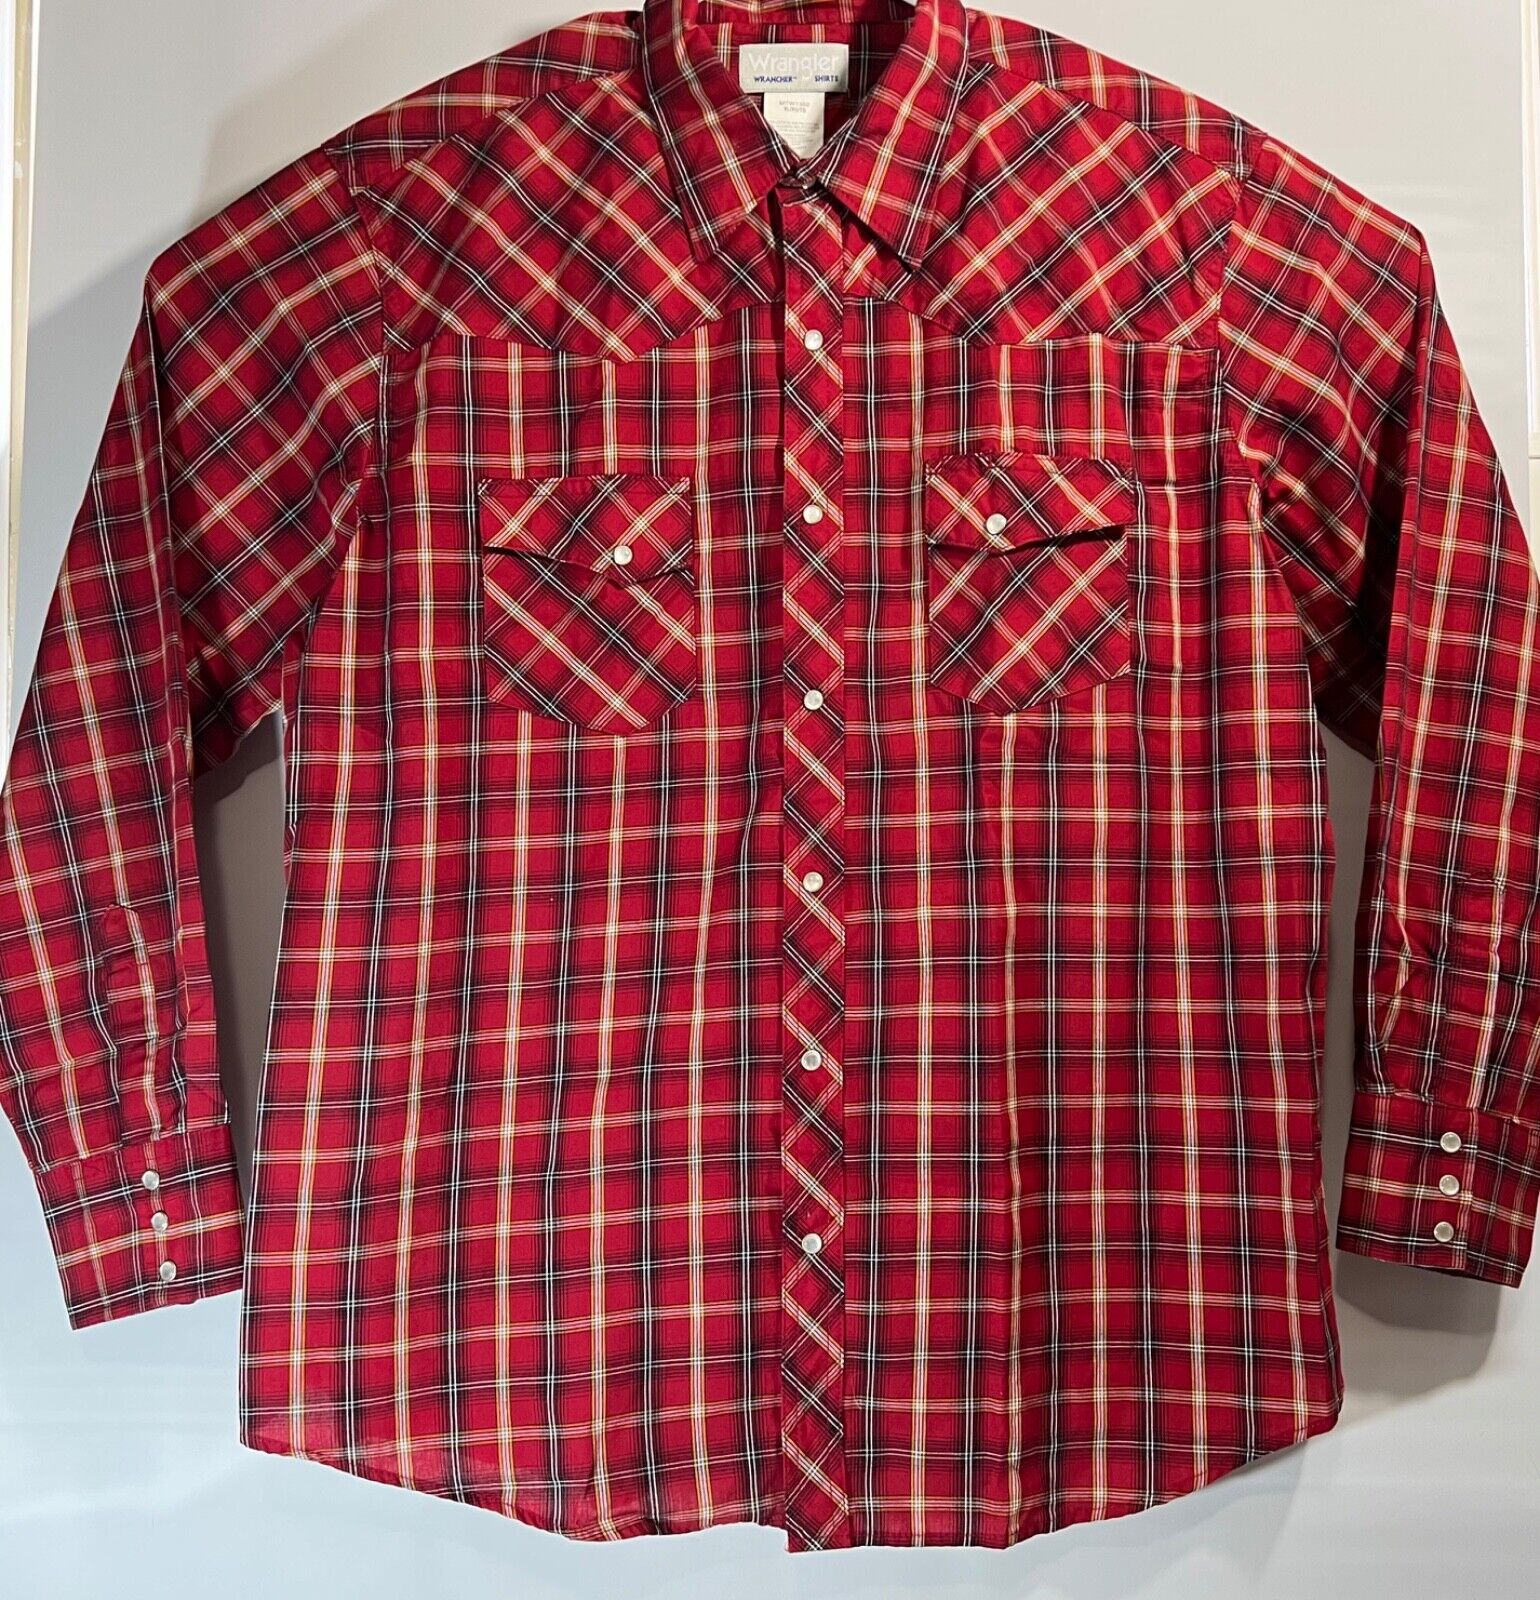 Wrancher Wrangler Pearl Snap Western Long Sleeve Plaid Shirt Mens Size XL  Red | eBay